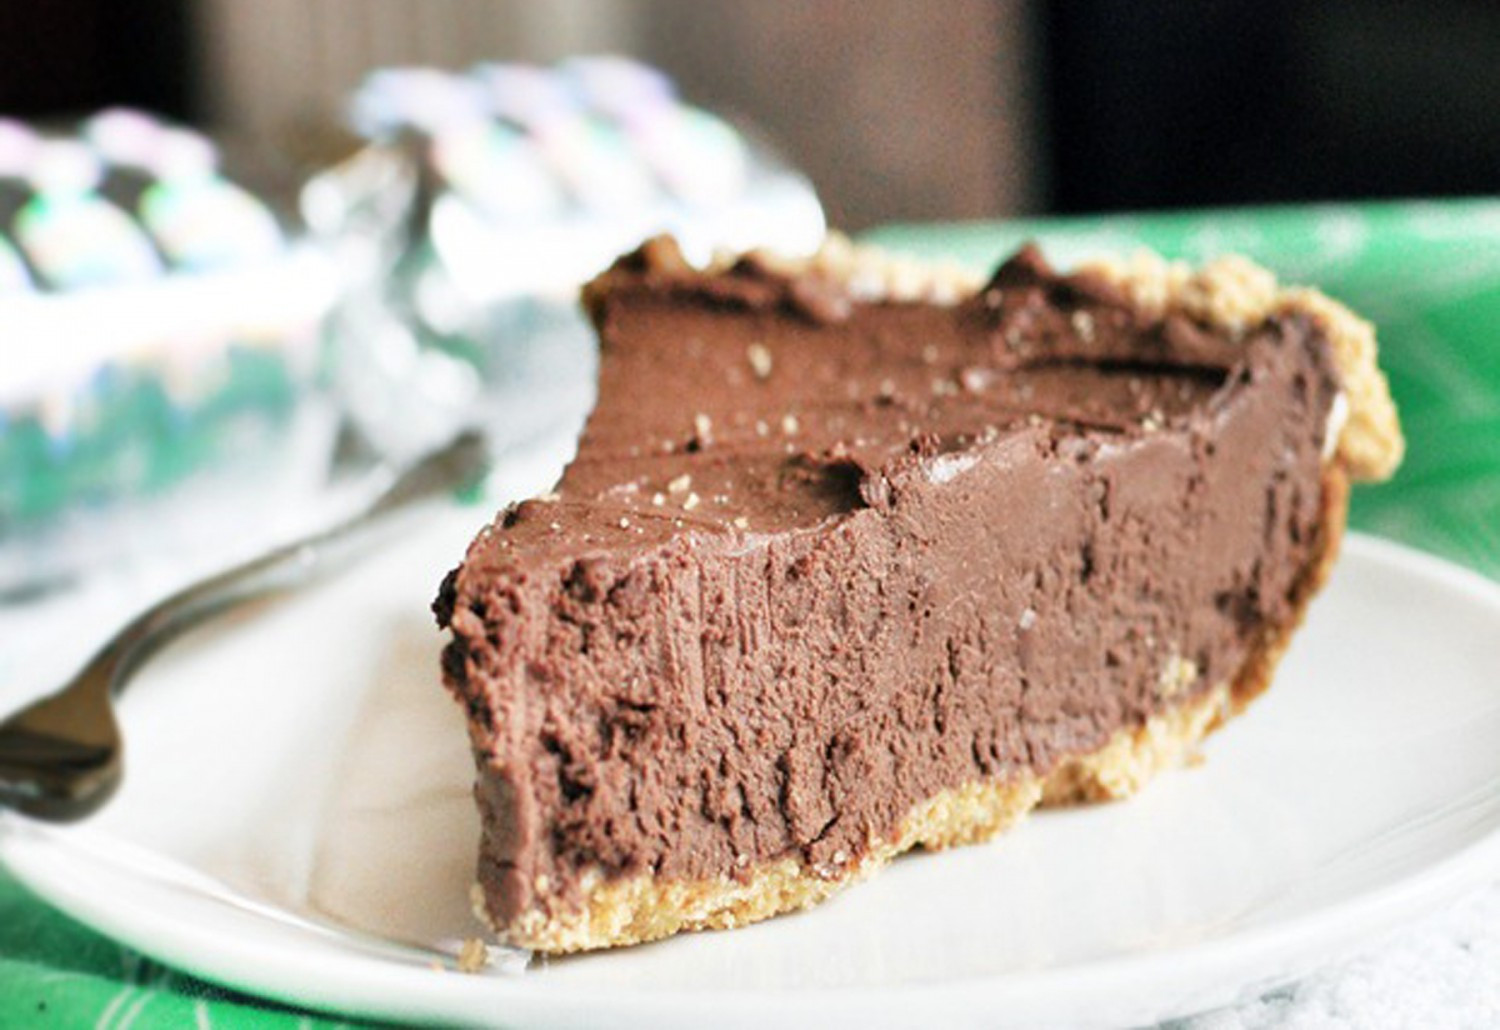 Healthy Chocolate Pie the 20 Best Ideas for tofu Recipes 52 Brilliant Ways to Spice Up Boring tofu